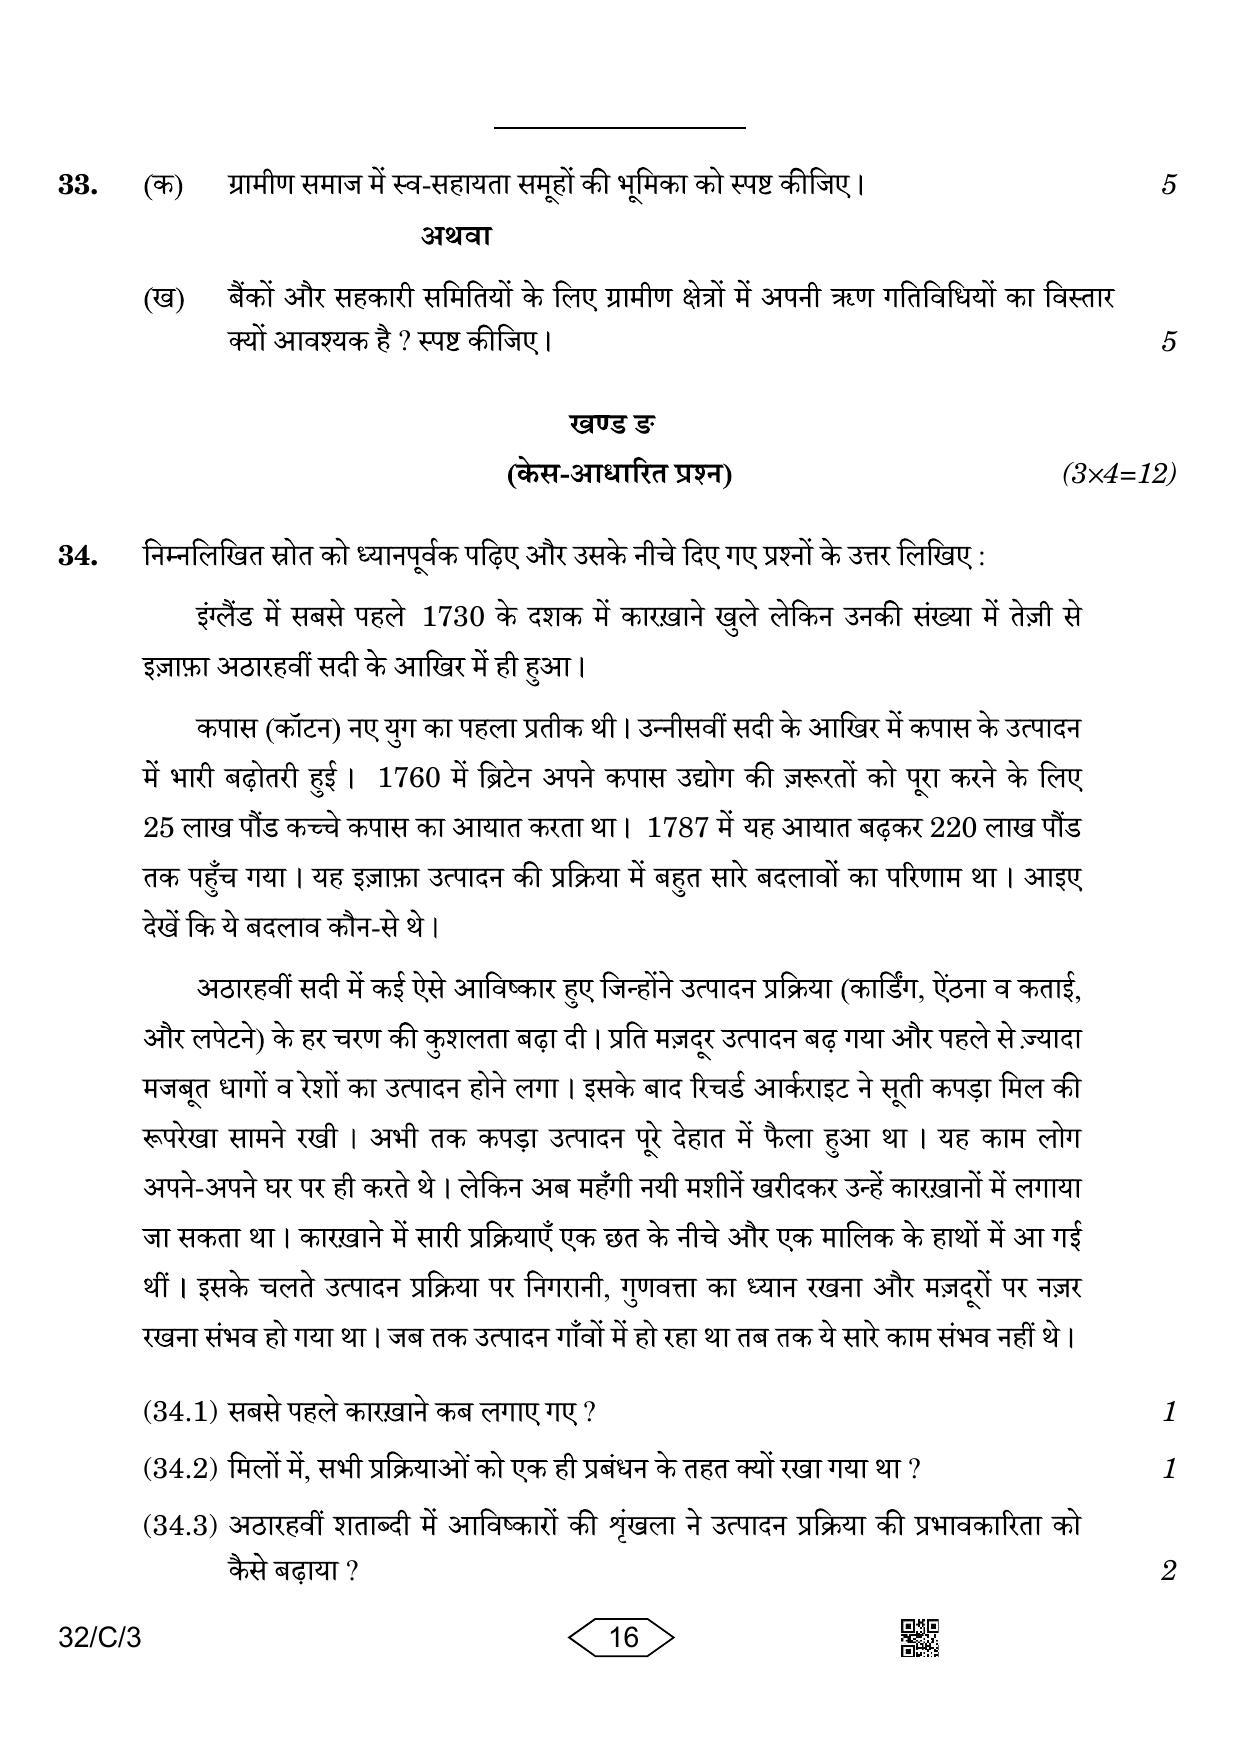 CBSE Class 10 32-3 Social Science 2023 (Compartment) Question Paper - Page 16